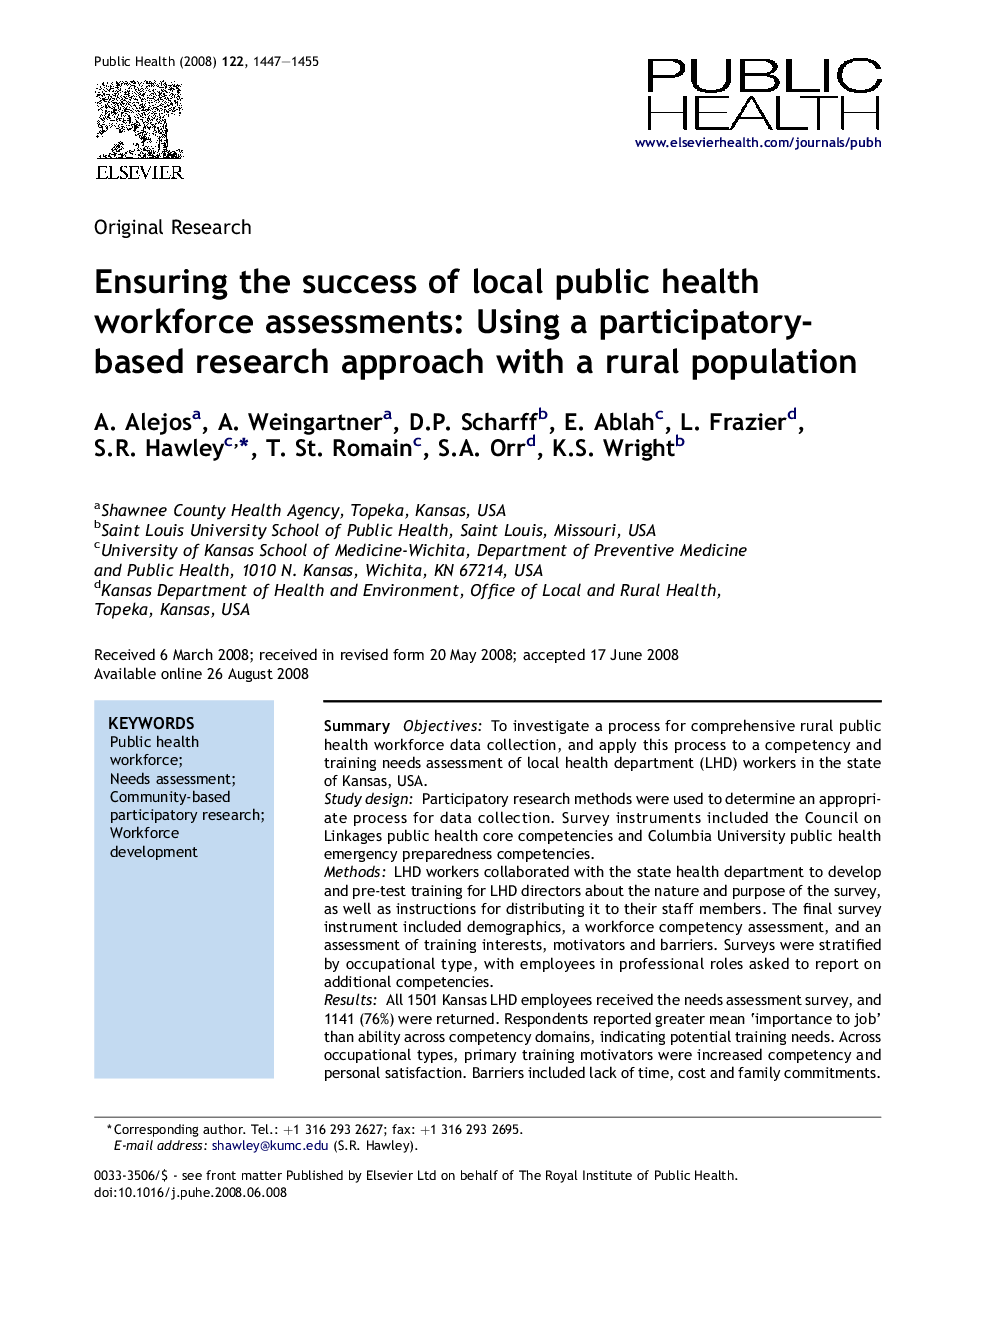 Ensuring the success of local public health workforce assessments: Using a participatory-based research approach with a rural population